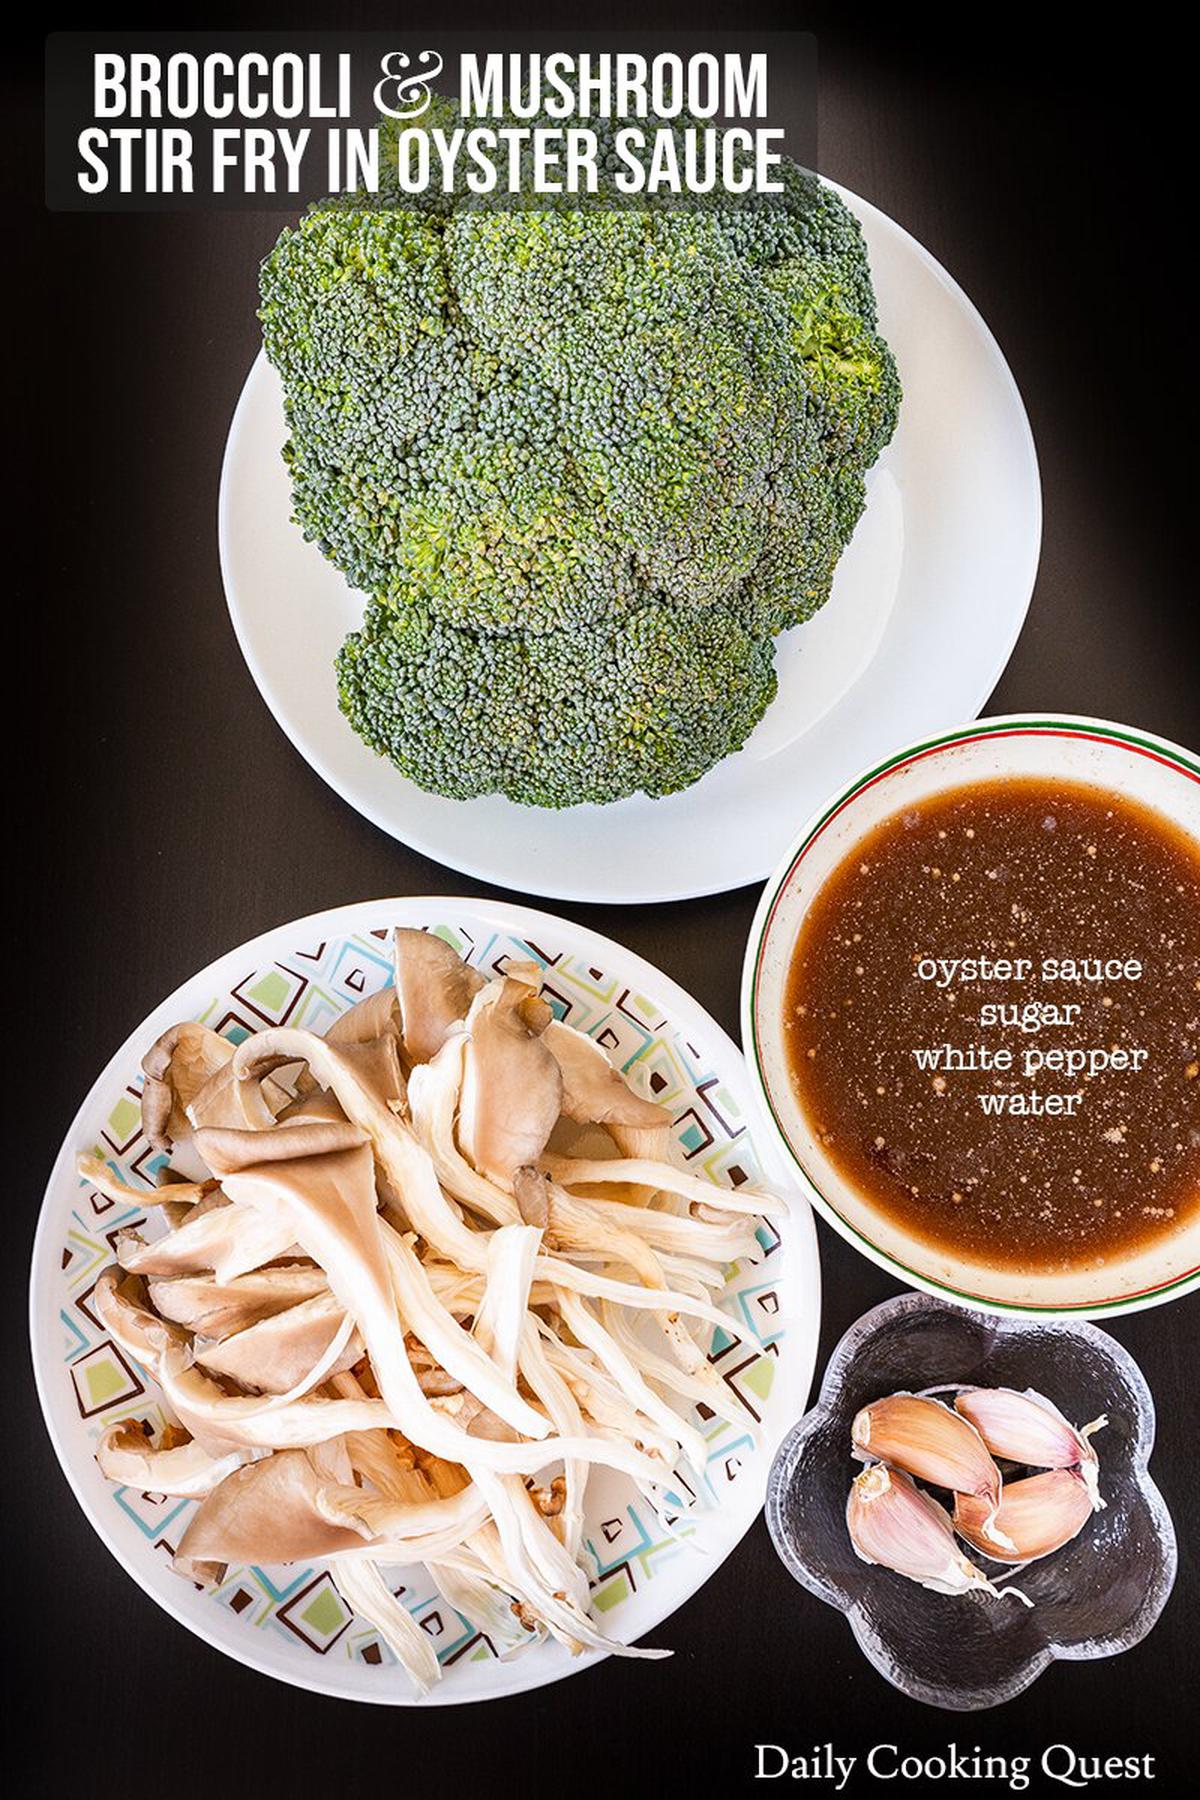 Ingredients to prepare broccoli and mushroom stir try in oyster sauce: broccoli, oyster mushroom, garlic, oyster sauce, white pepper, sugar, and water.